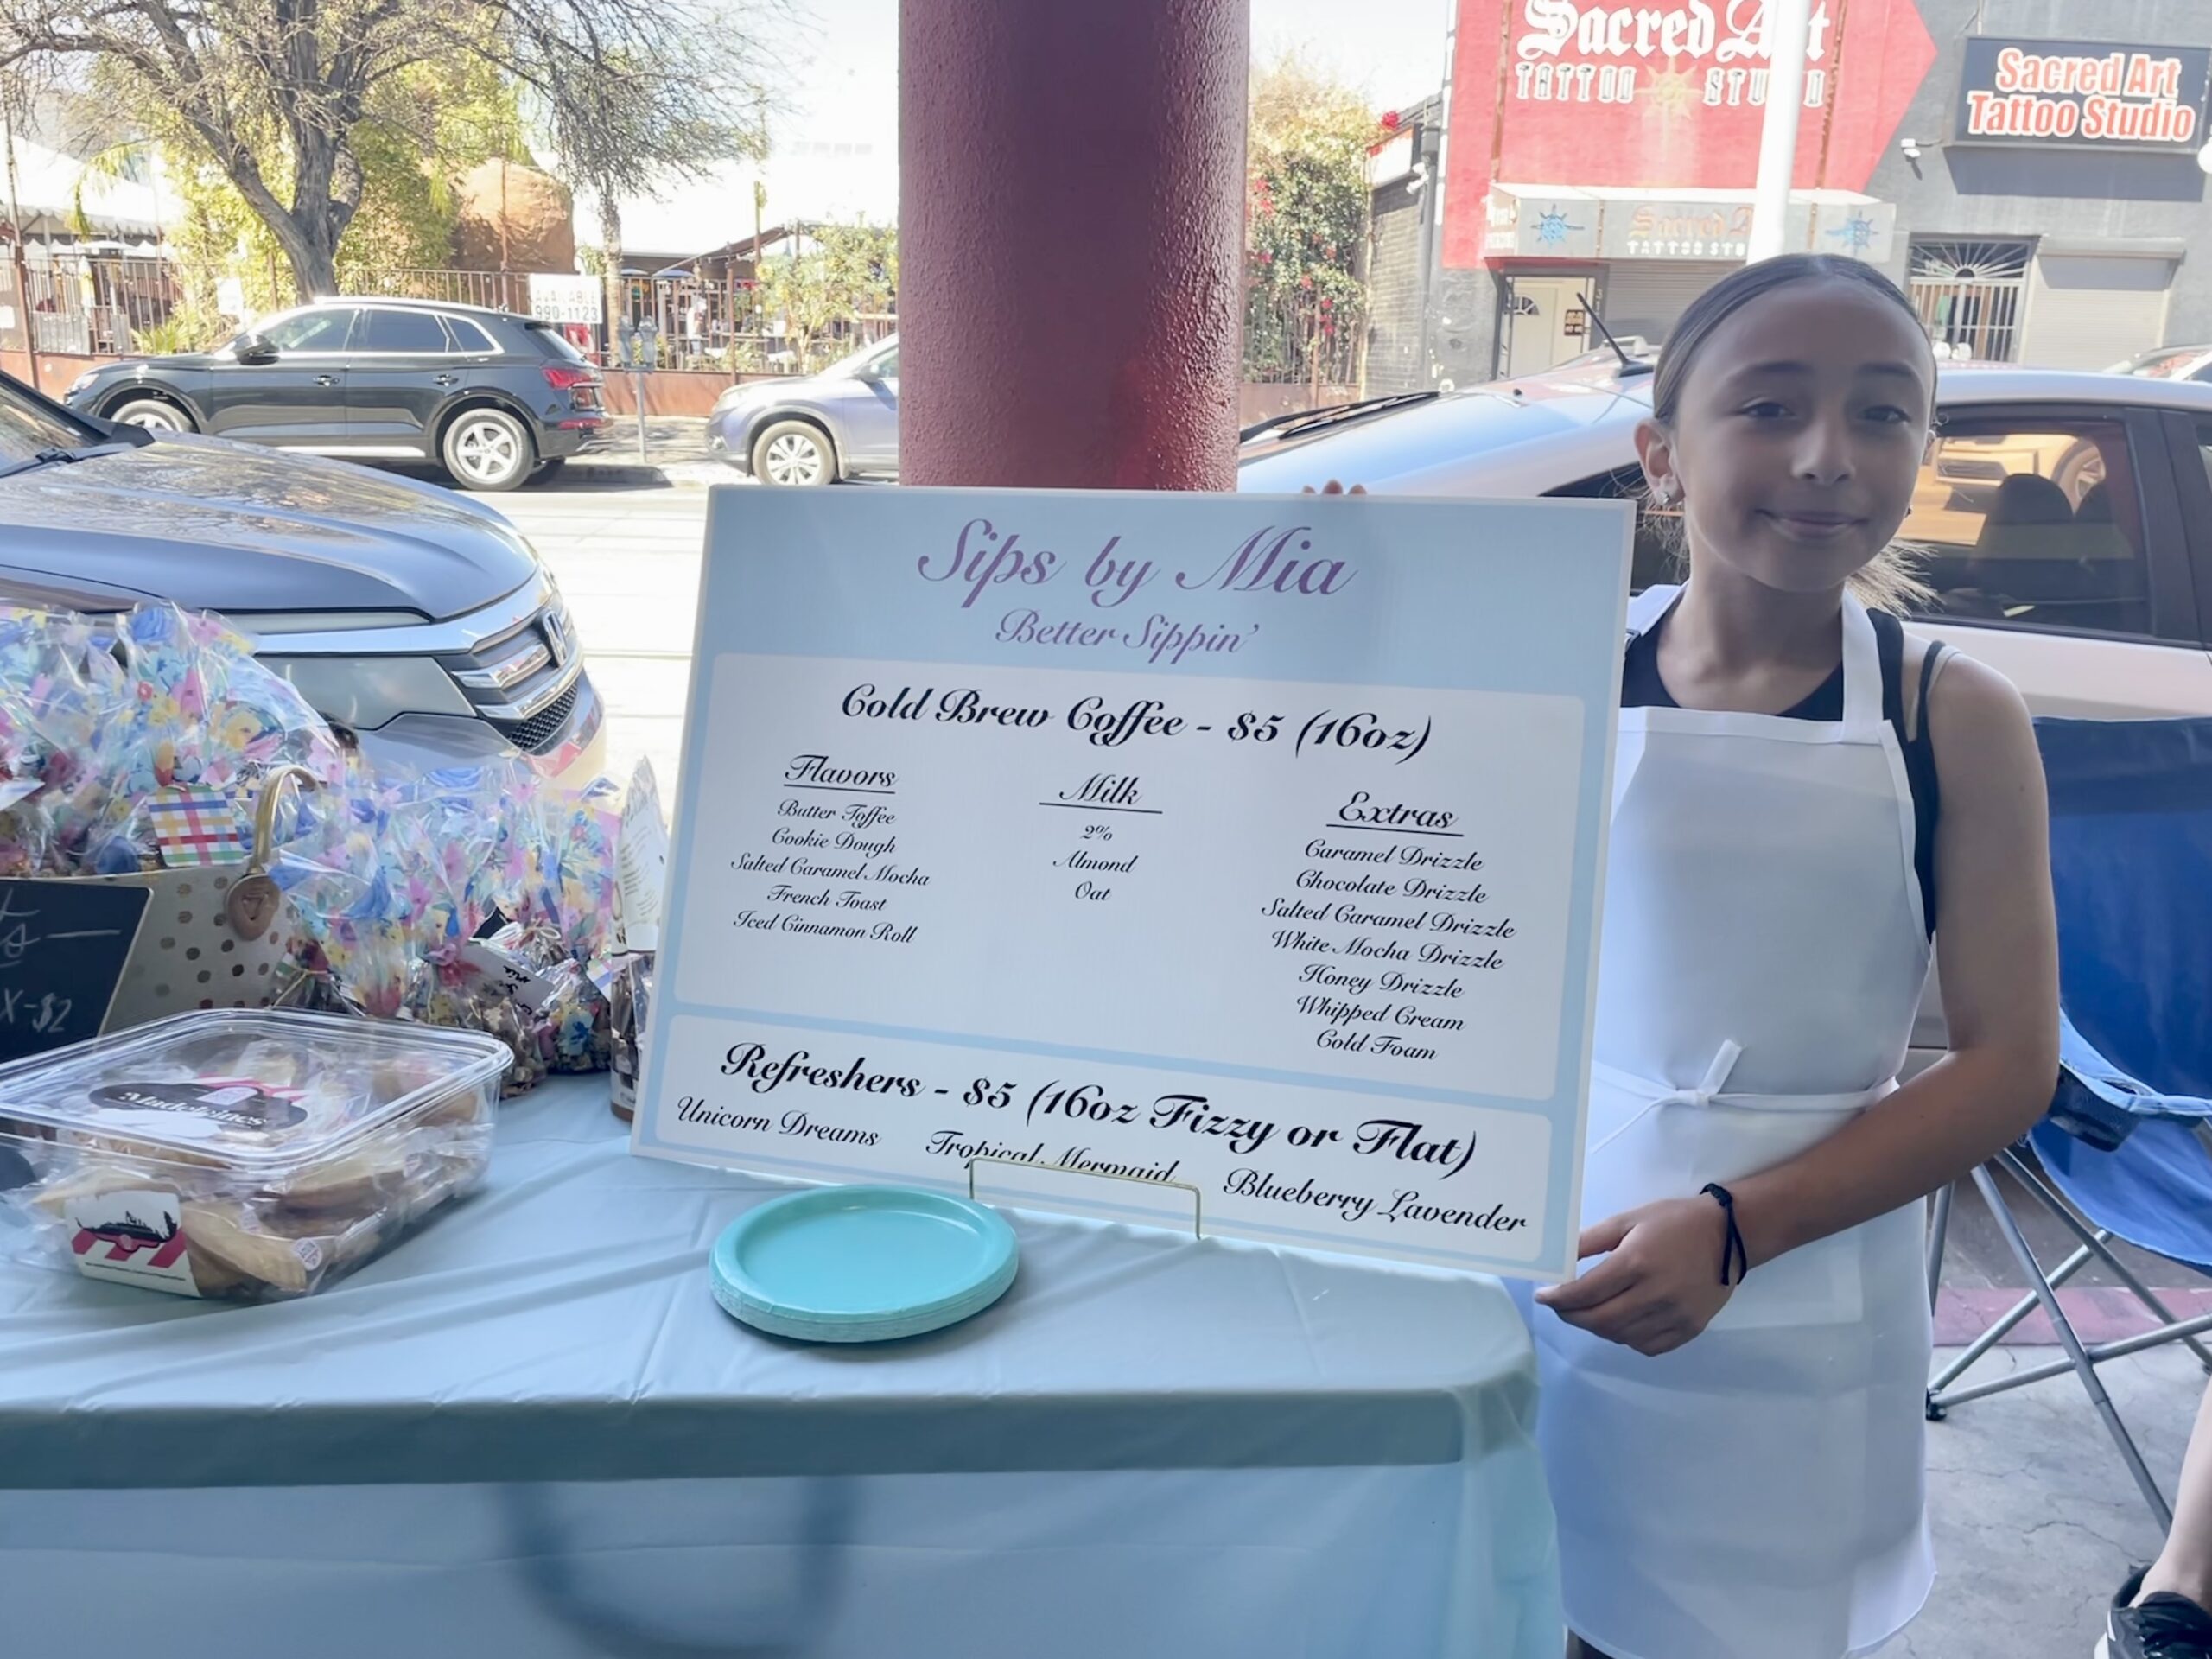 We got the opportunity to chat with Sips by Mia owner, Mia, on April 1, 2023 at our market in Tucson, Arizona!